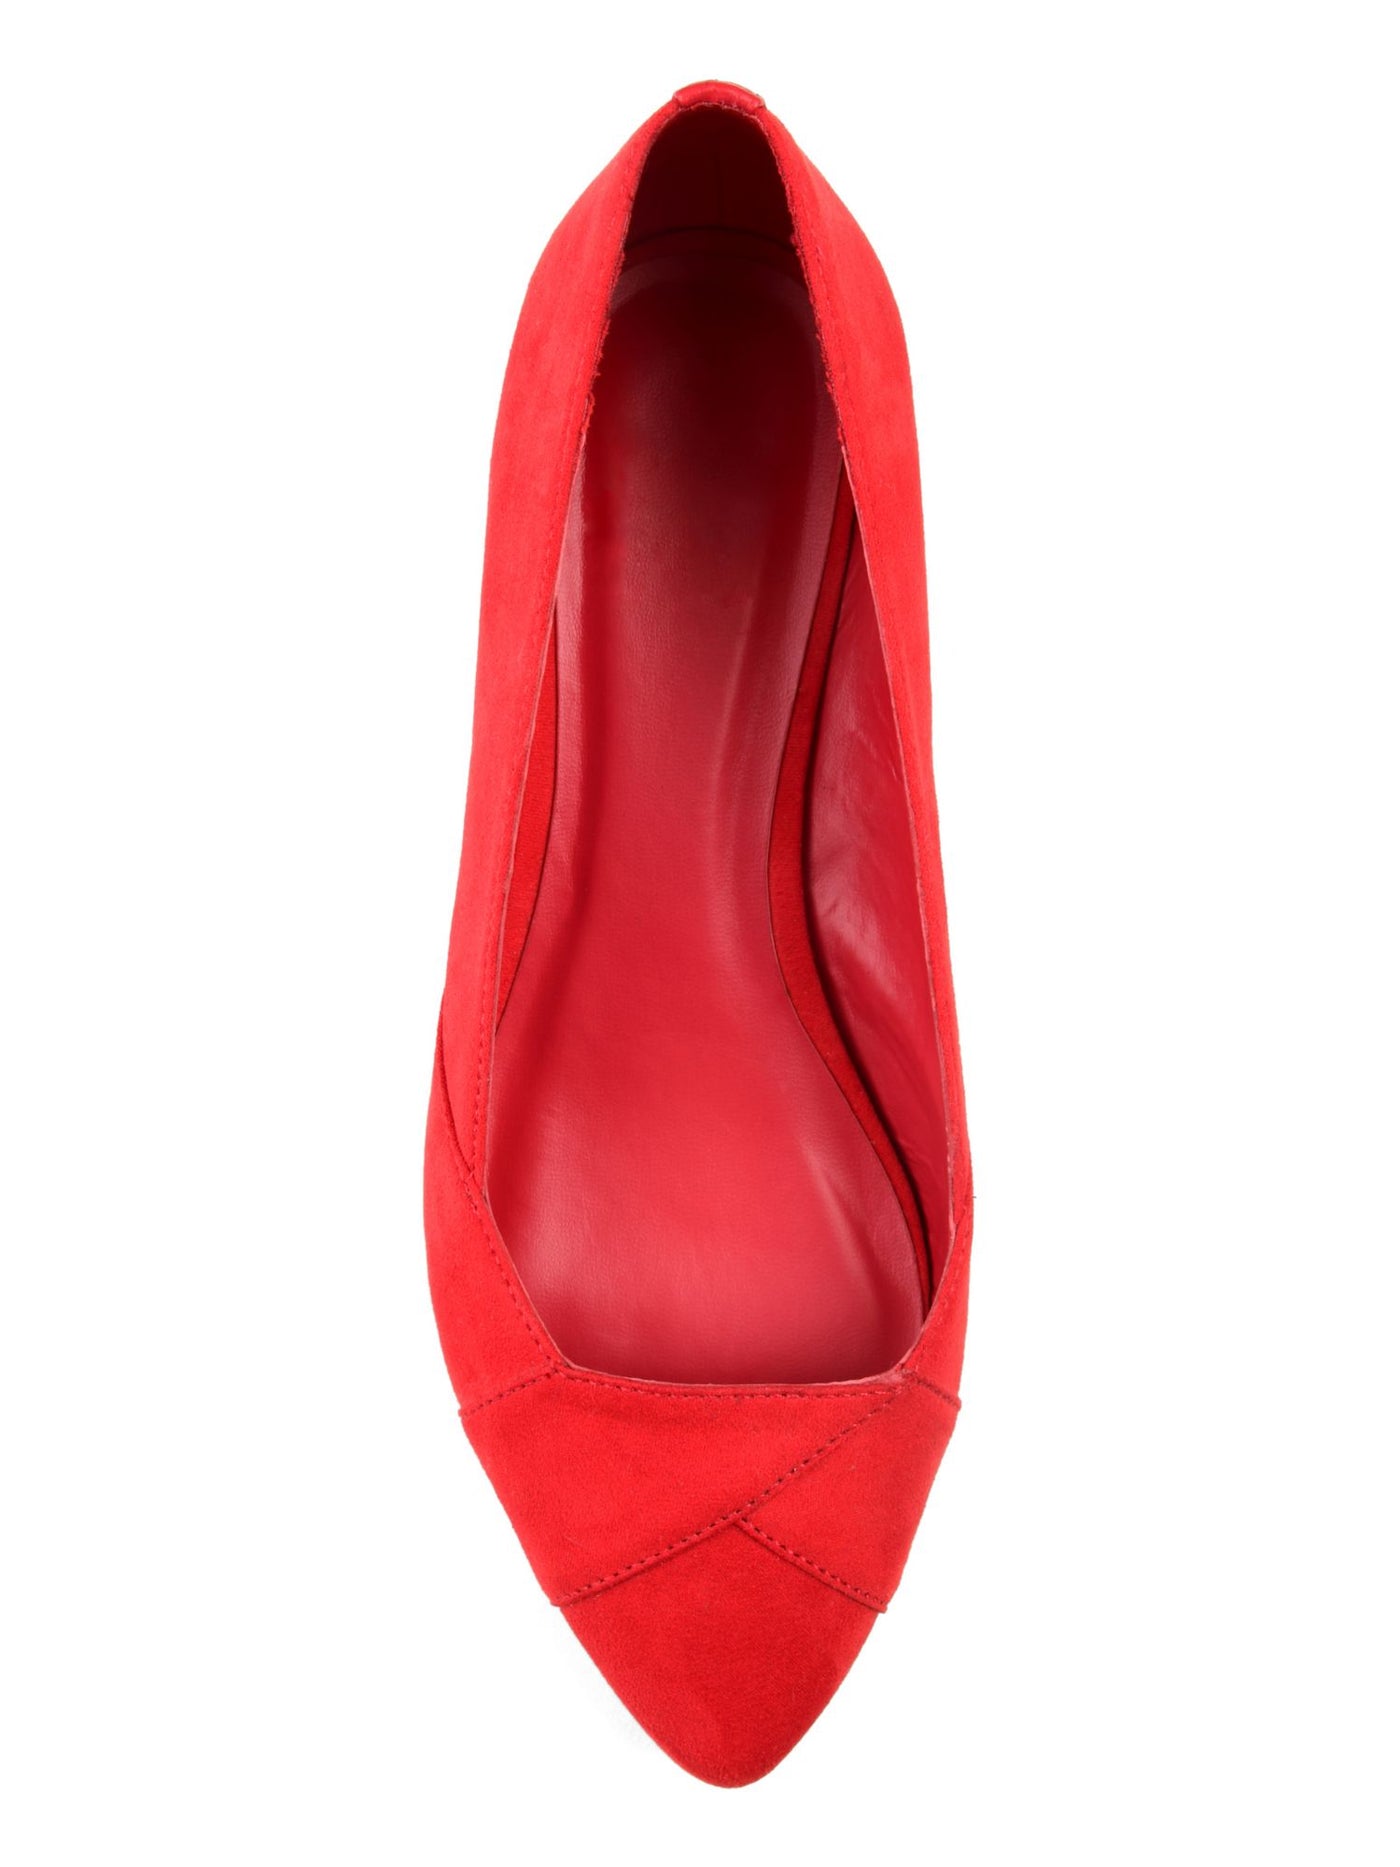 JOURNEE COLLECTION Womens Red Cushioned Justine Pointed Toe Block Heel Slip On Dress Heeled Loafers 6.5